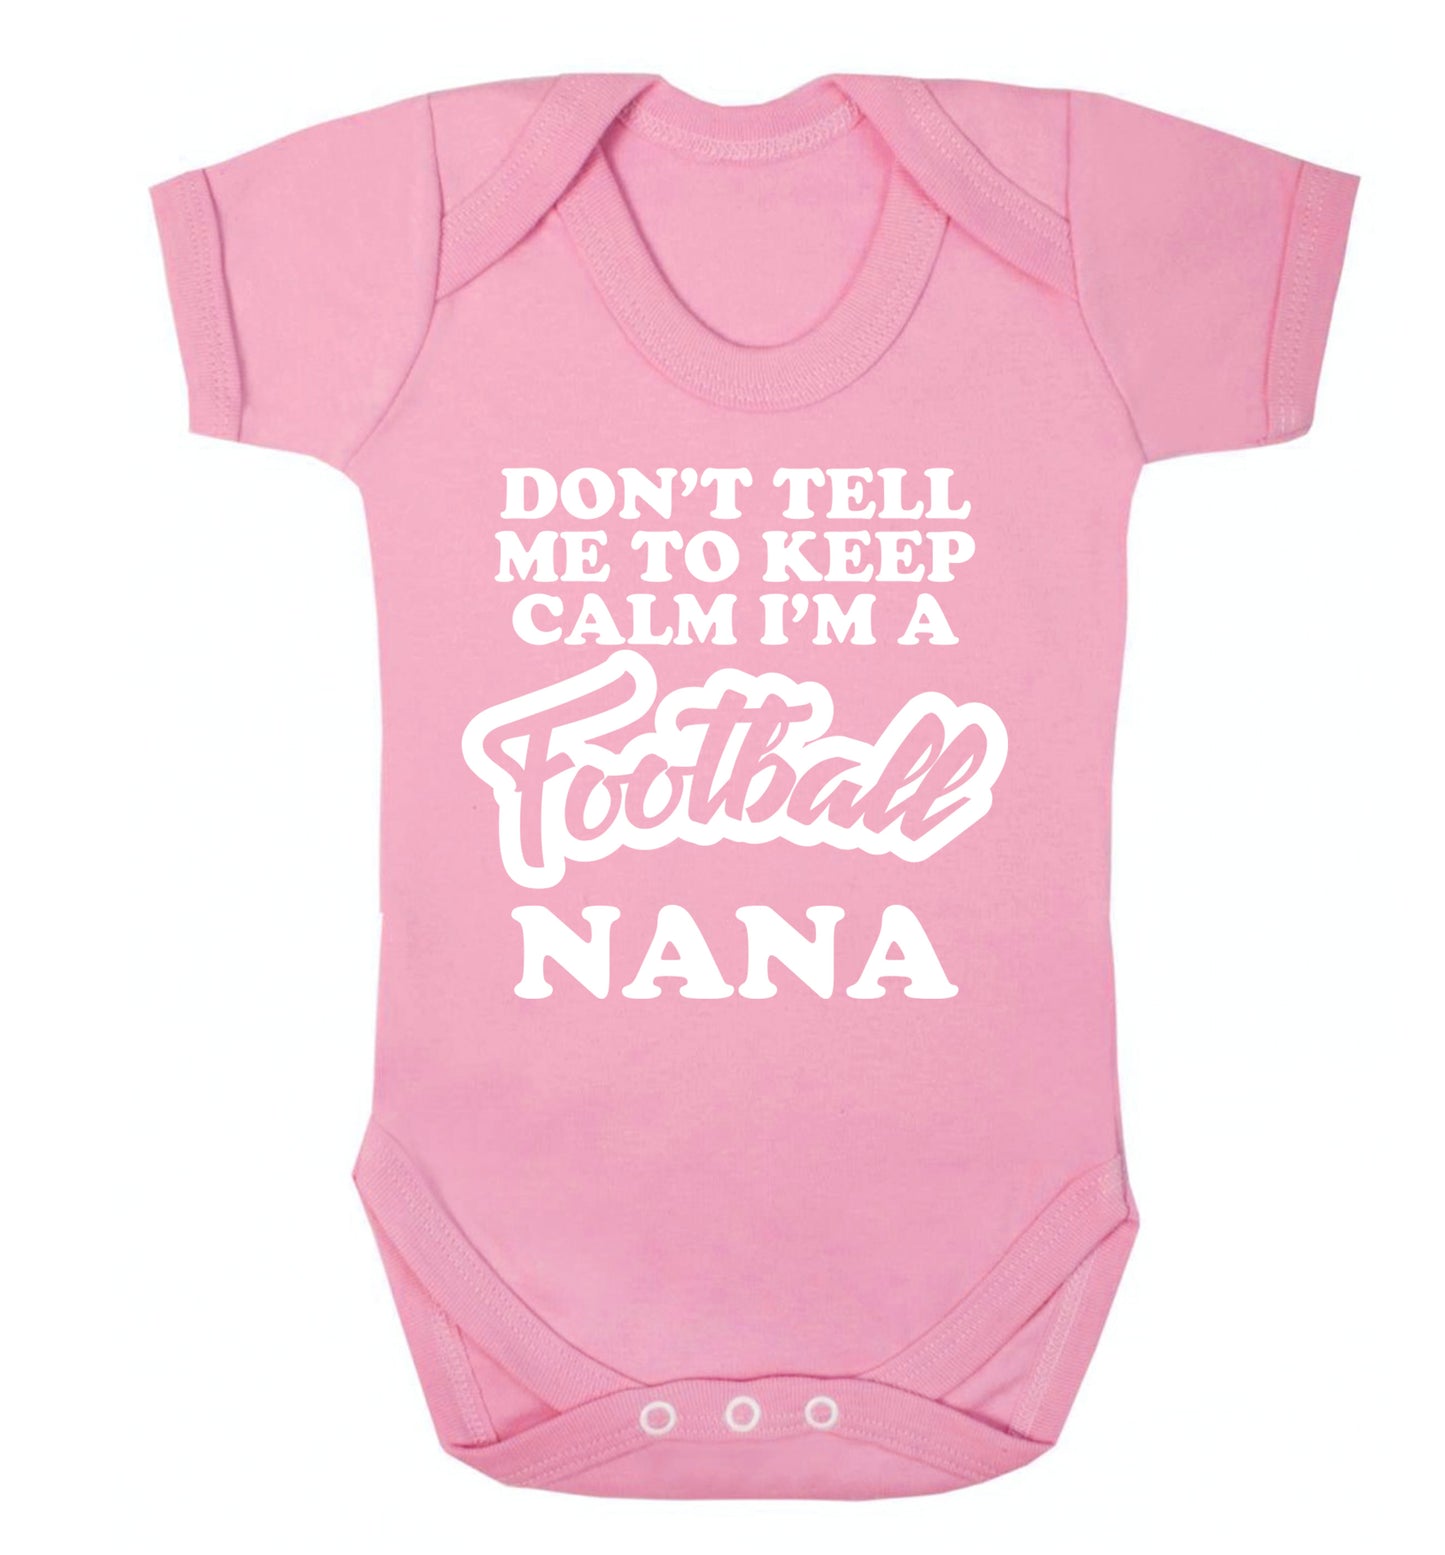 Don't tell me to keep calm I'm a football nana Baby Vest pale pink 18-24 months